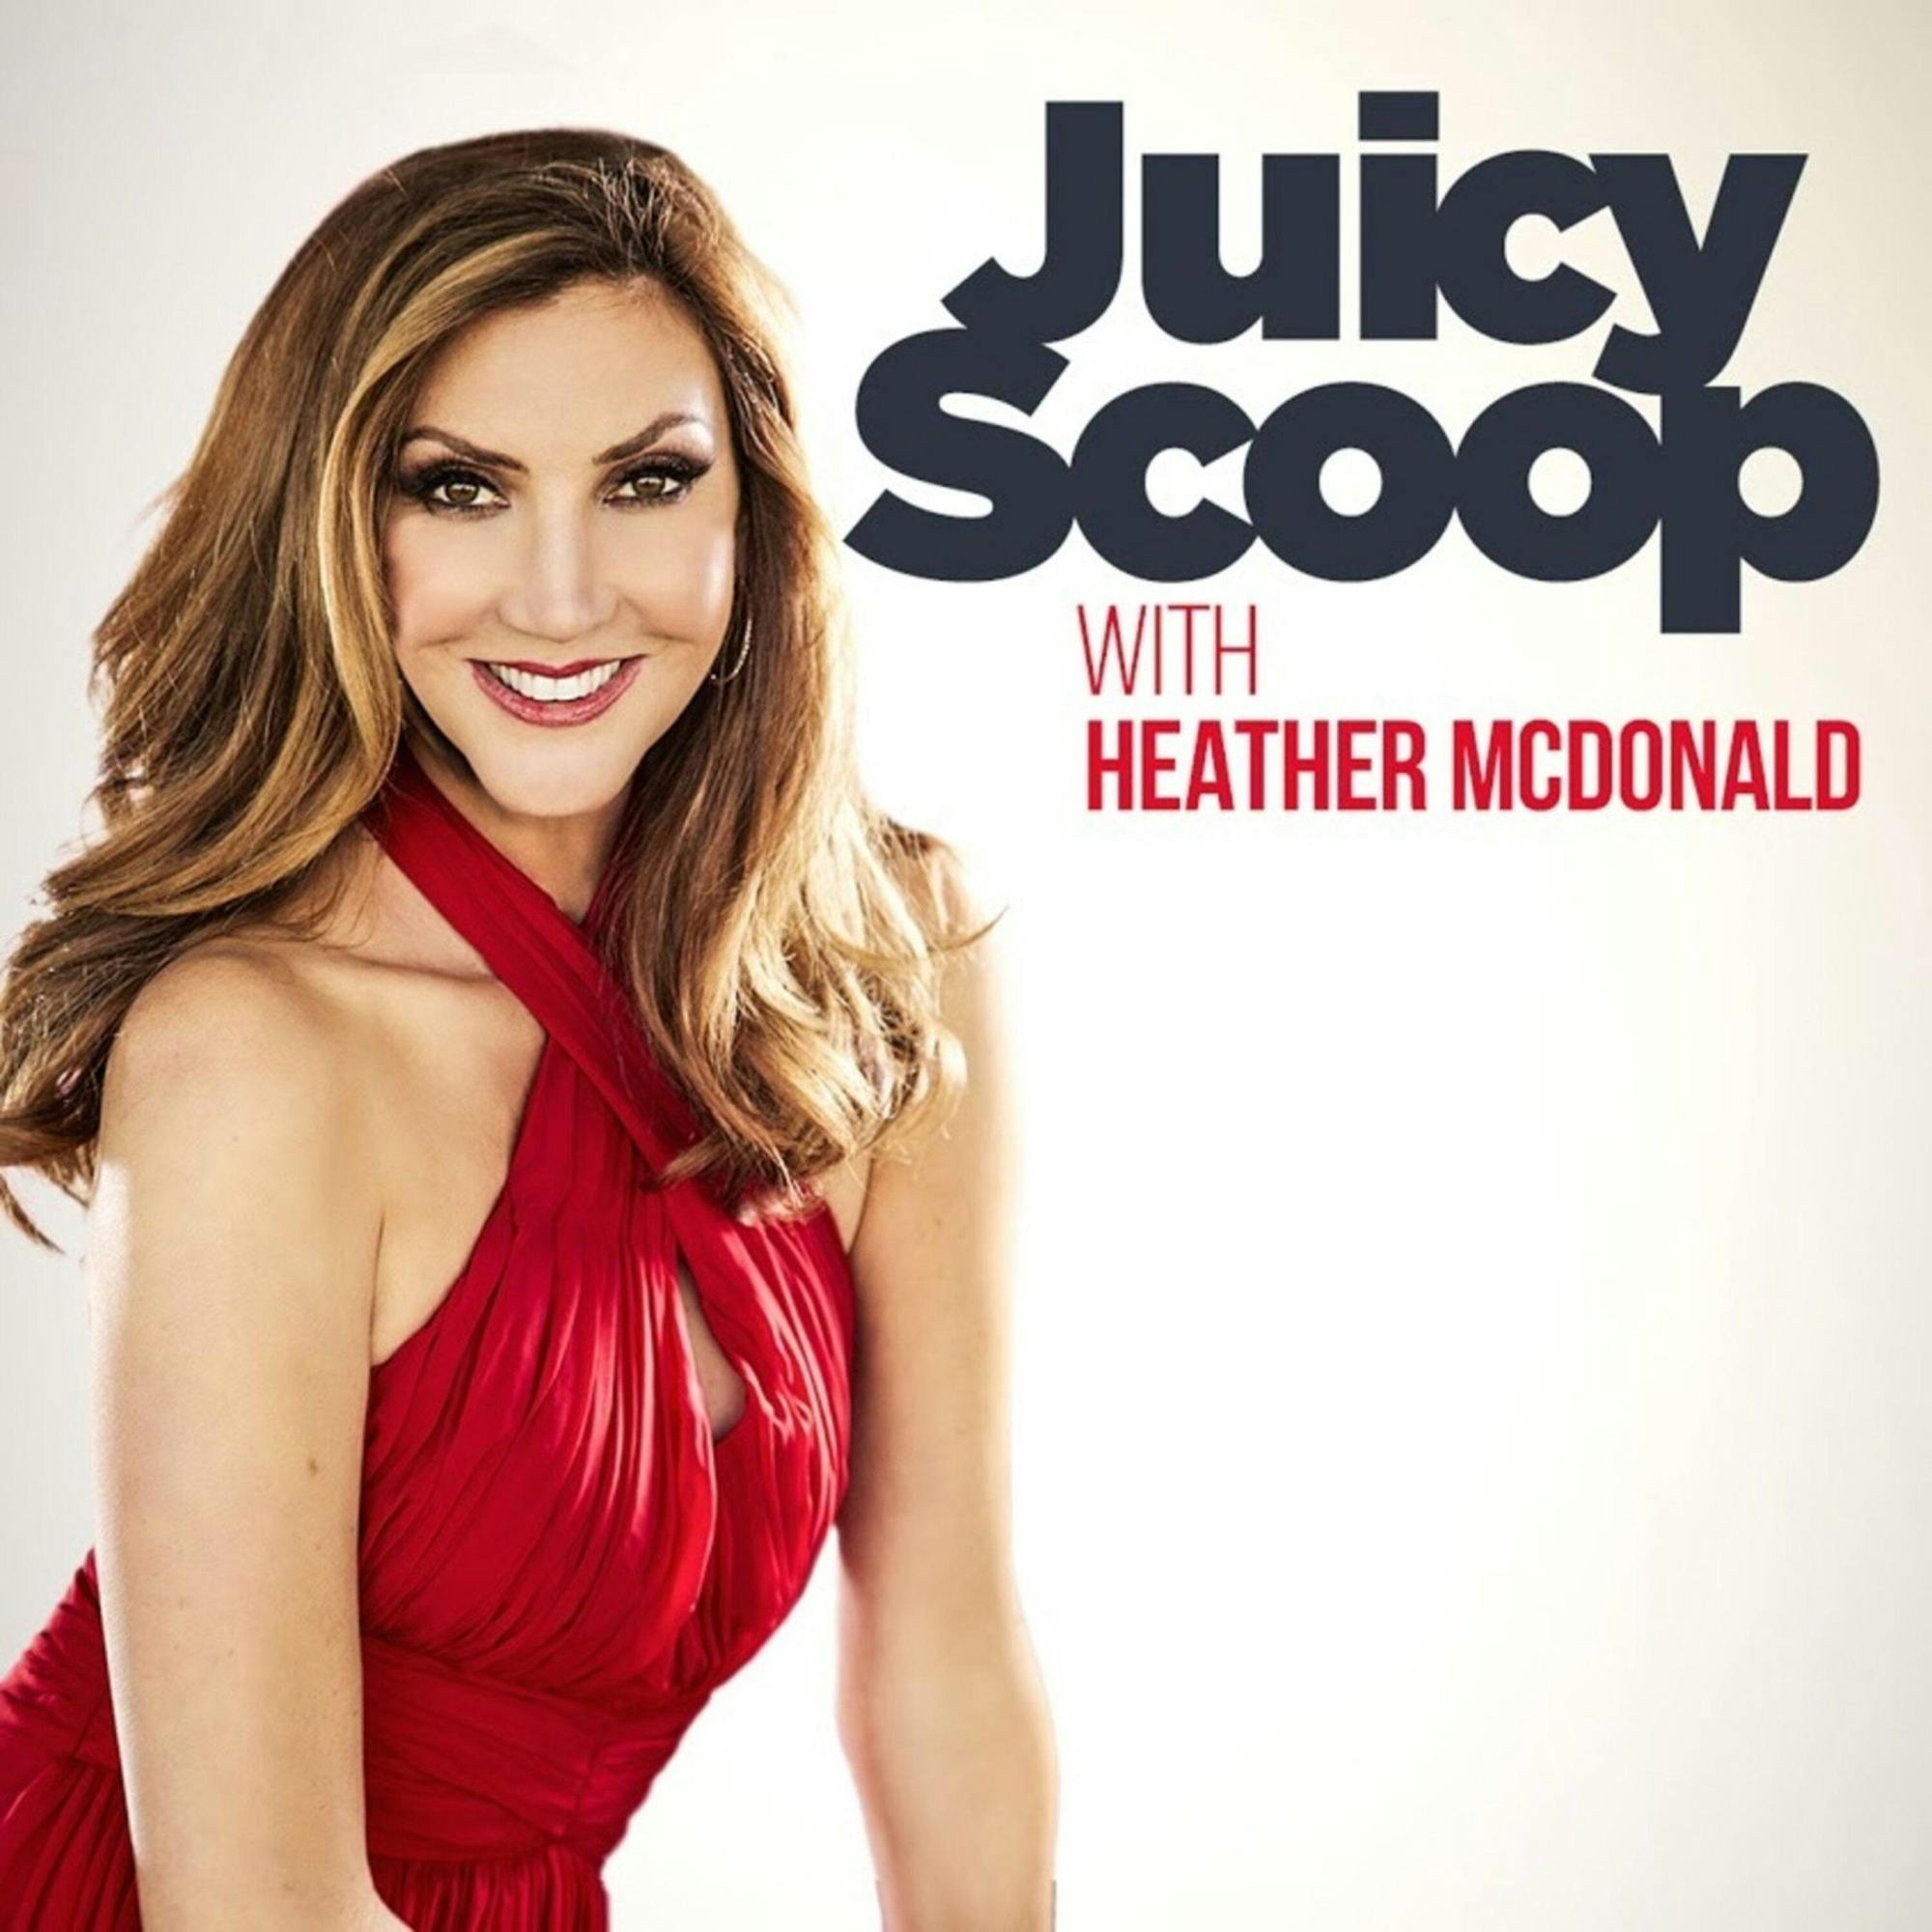 Juicy Scoop with Heather McDonald by Sony Music Entertainment / Heather McDonald